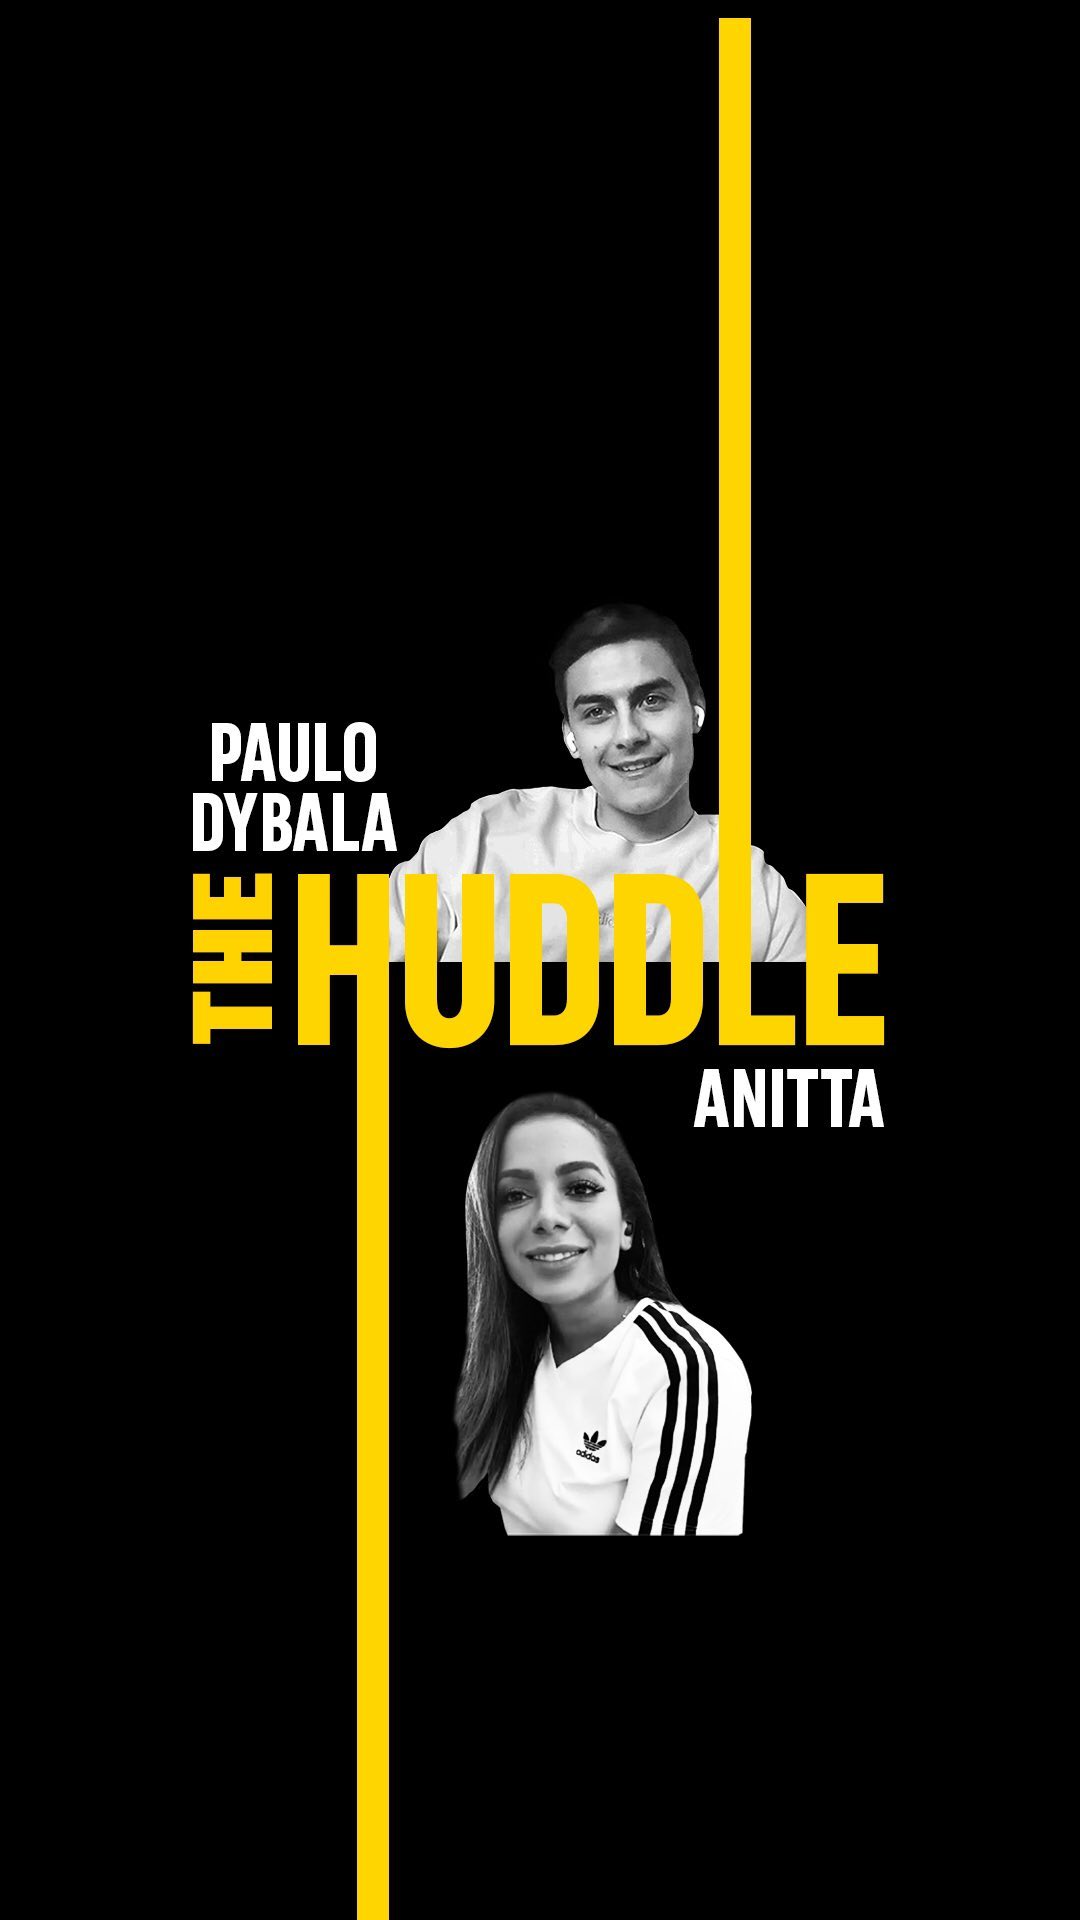 adidas - Music influences sport and sport influences music. ⁣⁣ ​⁣
⁣
@Anitta 🎶 and @PauloDybala ⚽️ come together from across the world to catch up on this episode of The Huddle. #hometeam